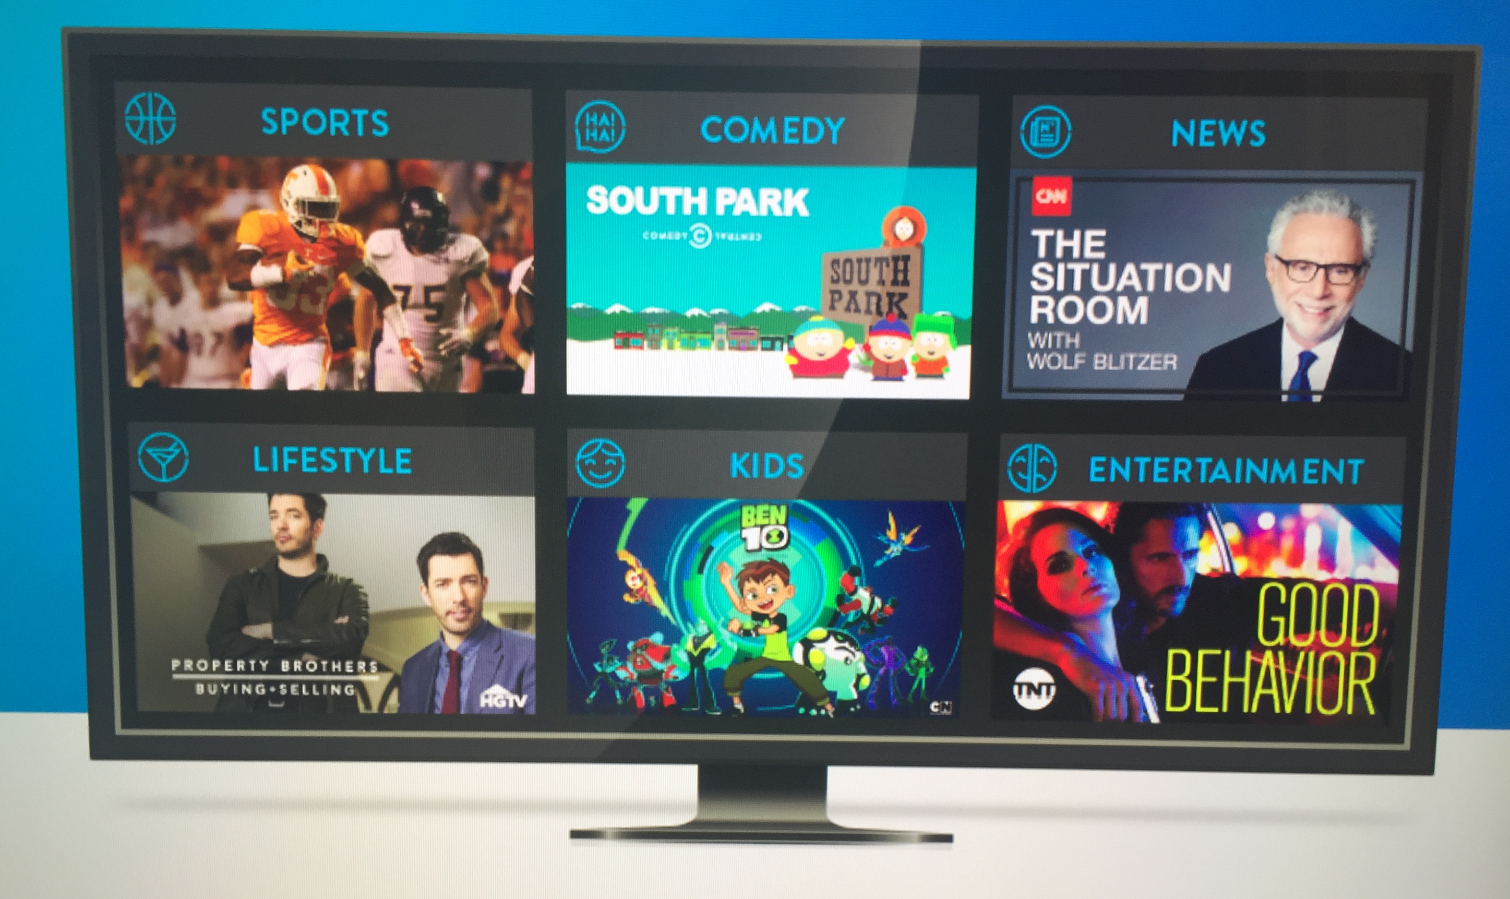 Sling Tv Lands On More Samsung Tvs Heres How To Get It Toms Guide